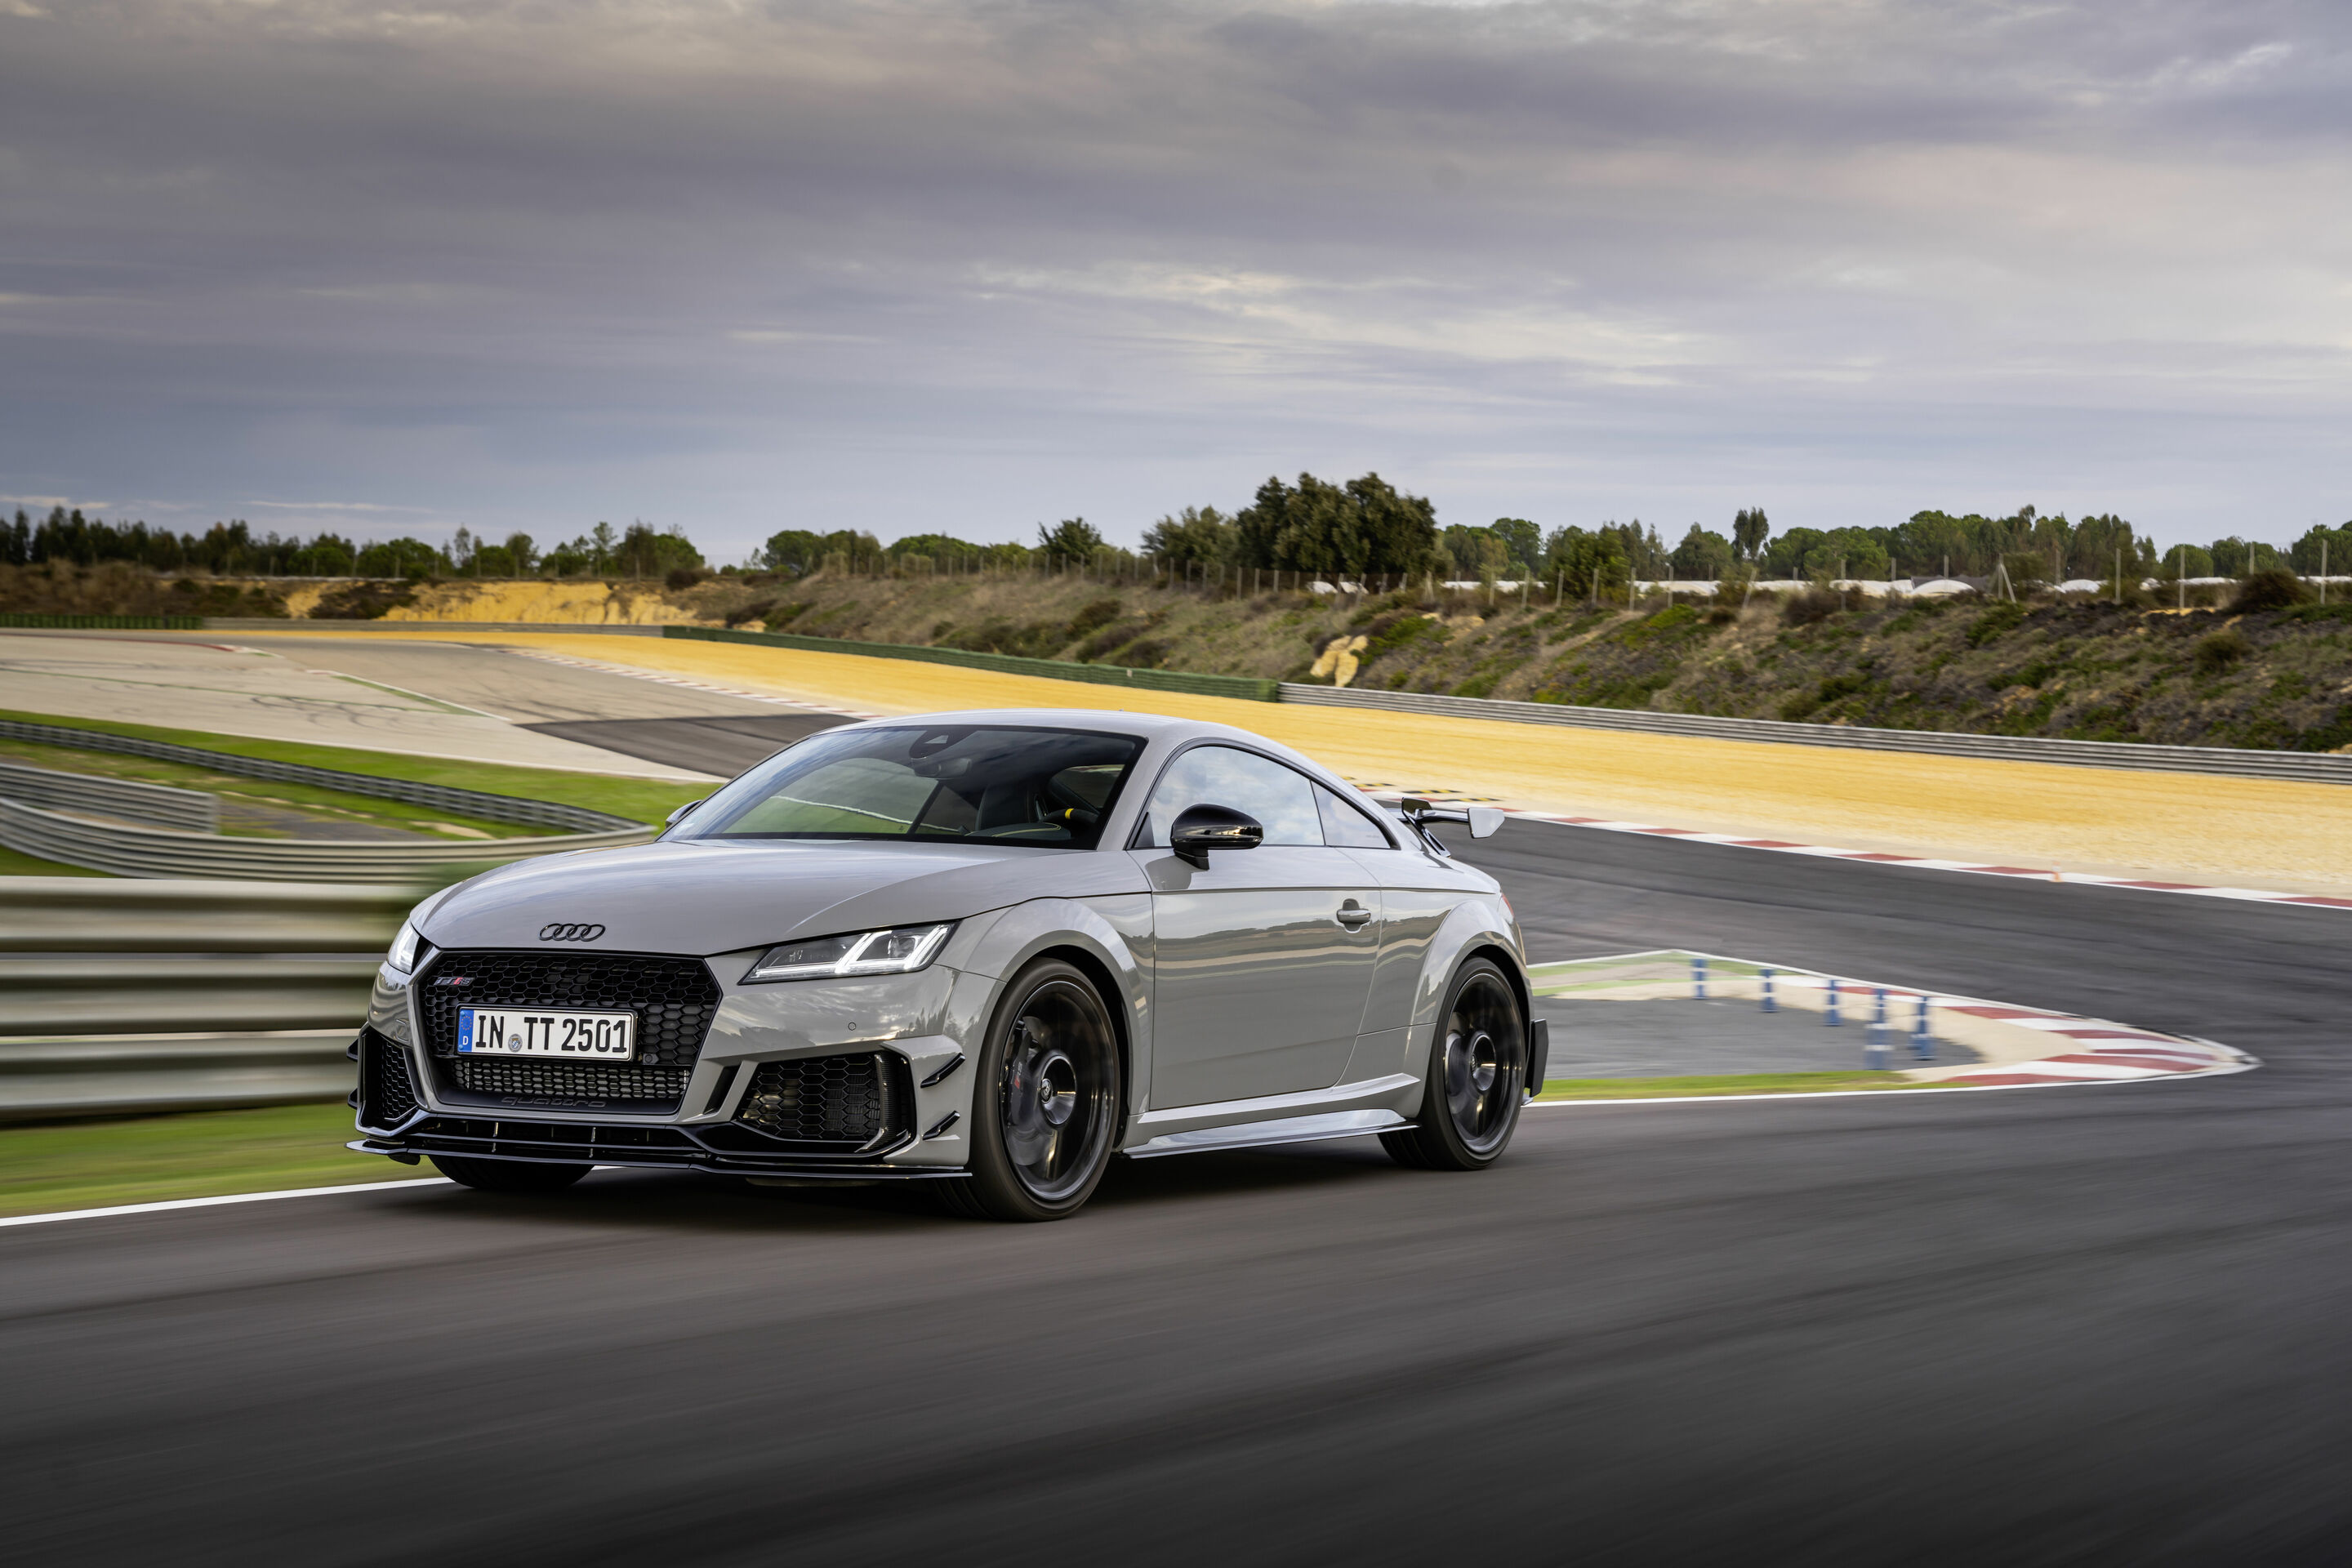 Inspired by Bauhaus Simplicity  How Audi TT Became a Design Icon